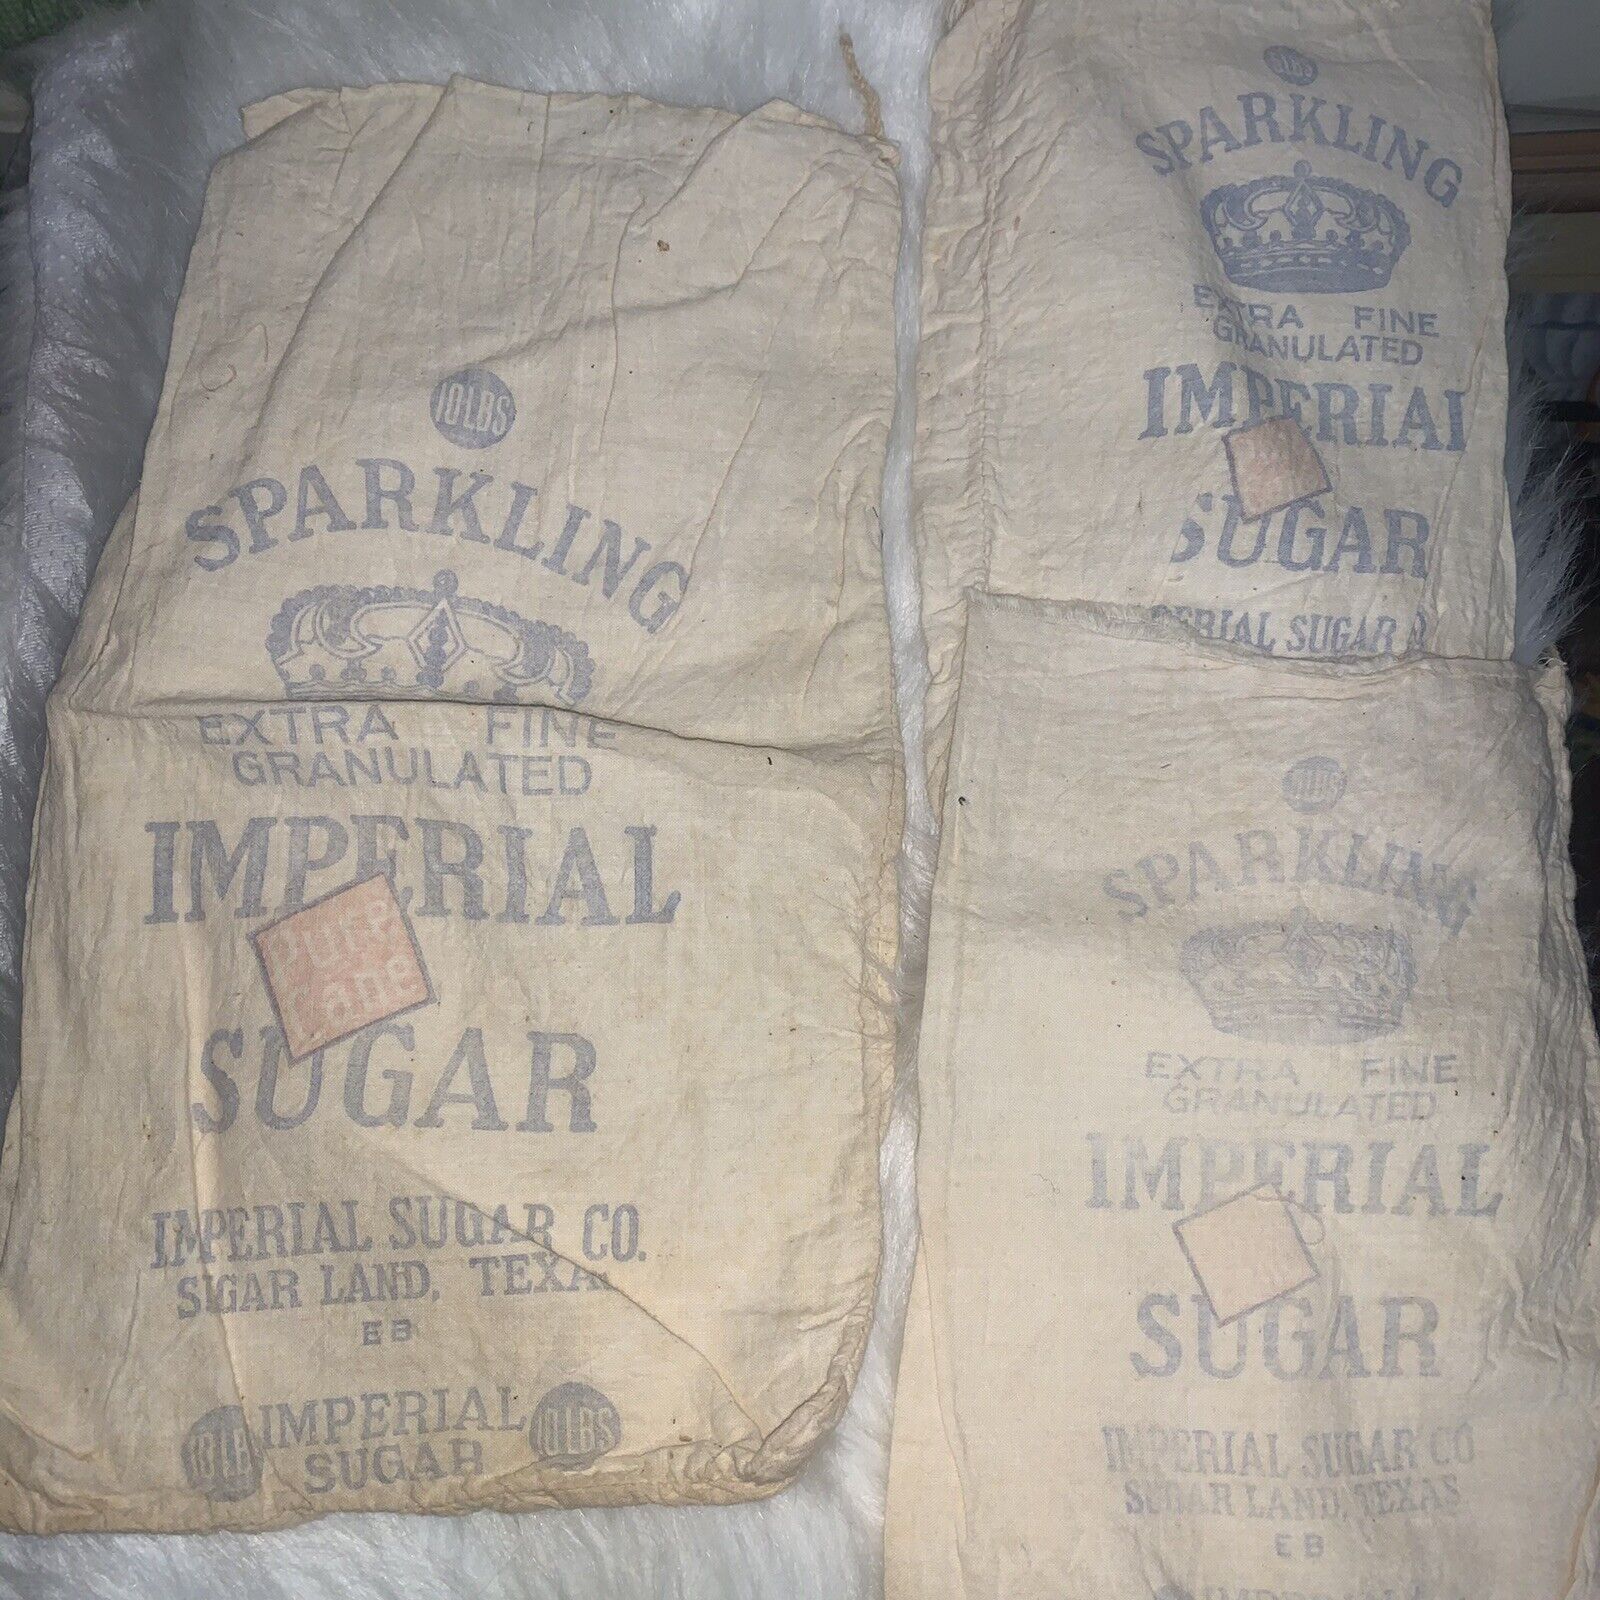 SET OF SPARKLING IMPERIAL PURE CANE SUGAR SACK FROM SUGARLAND TEXAS